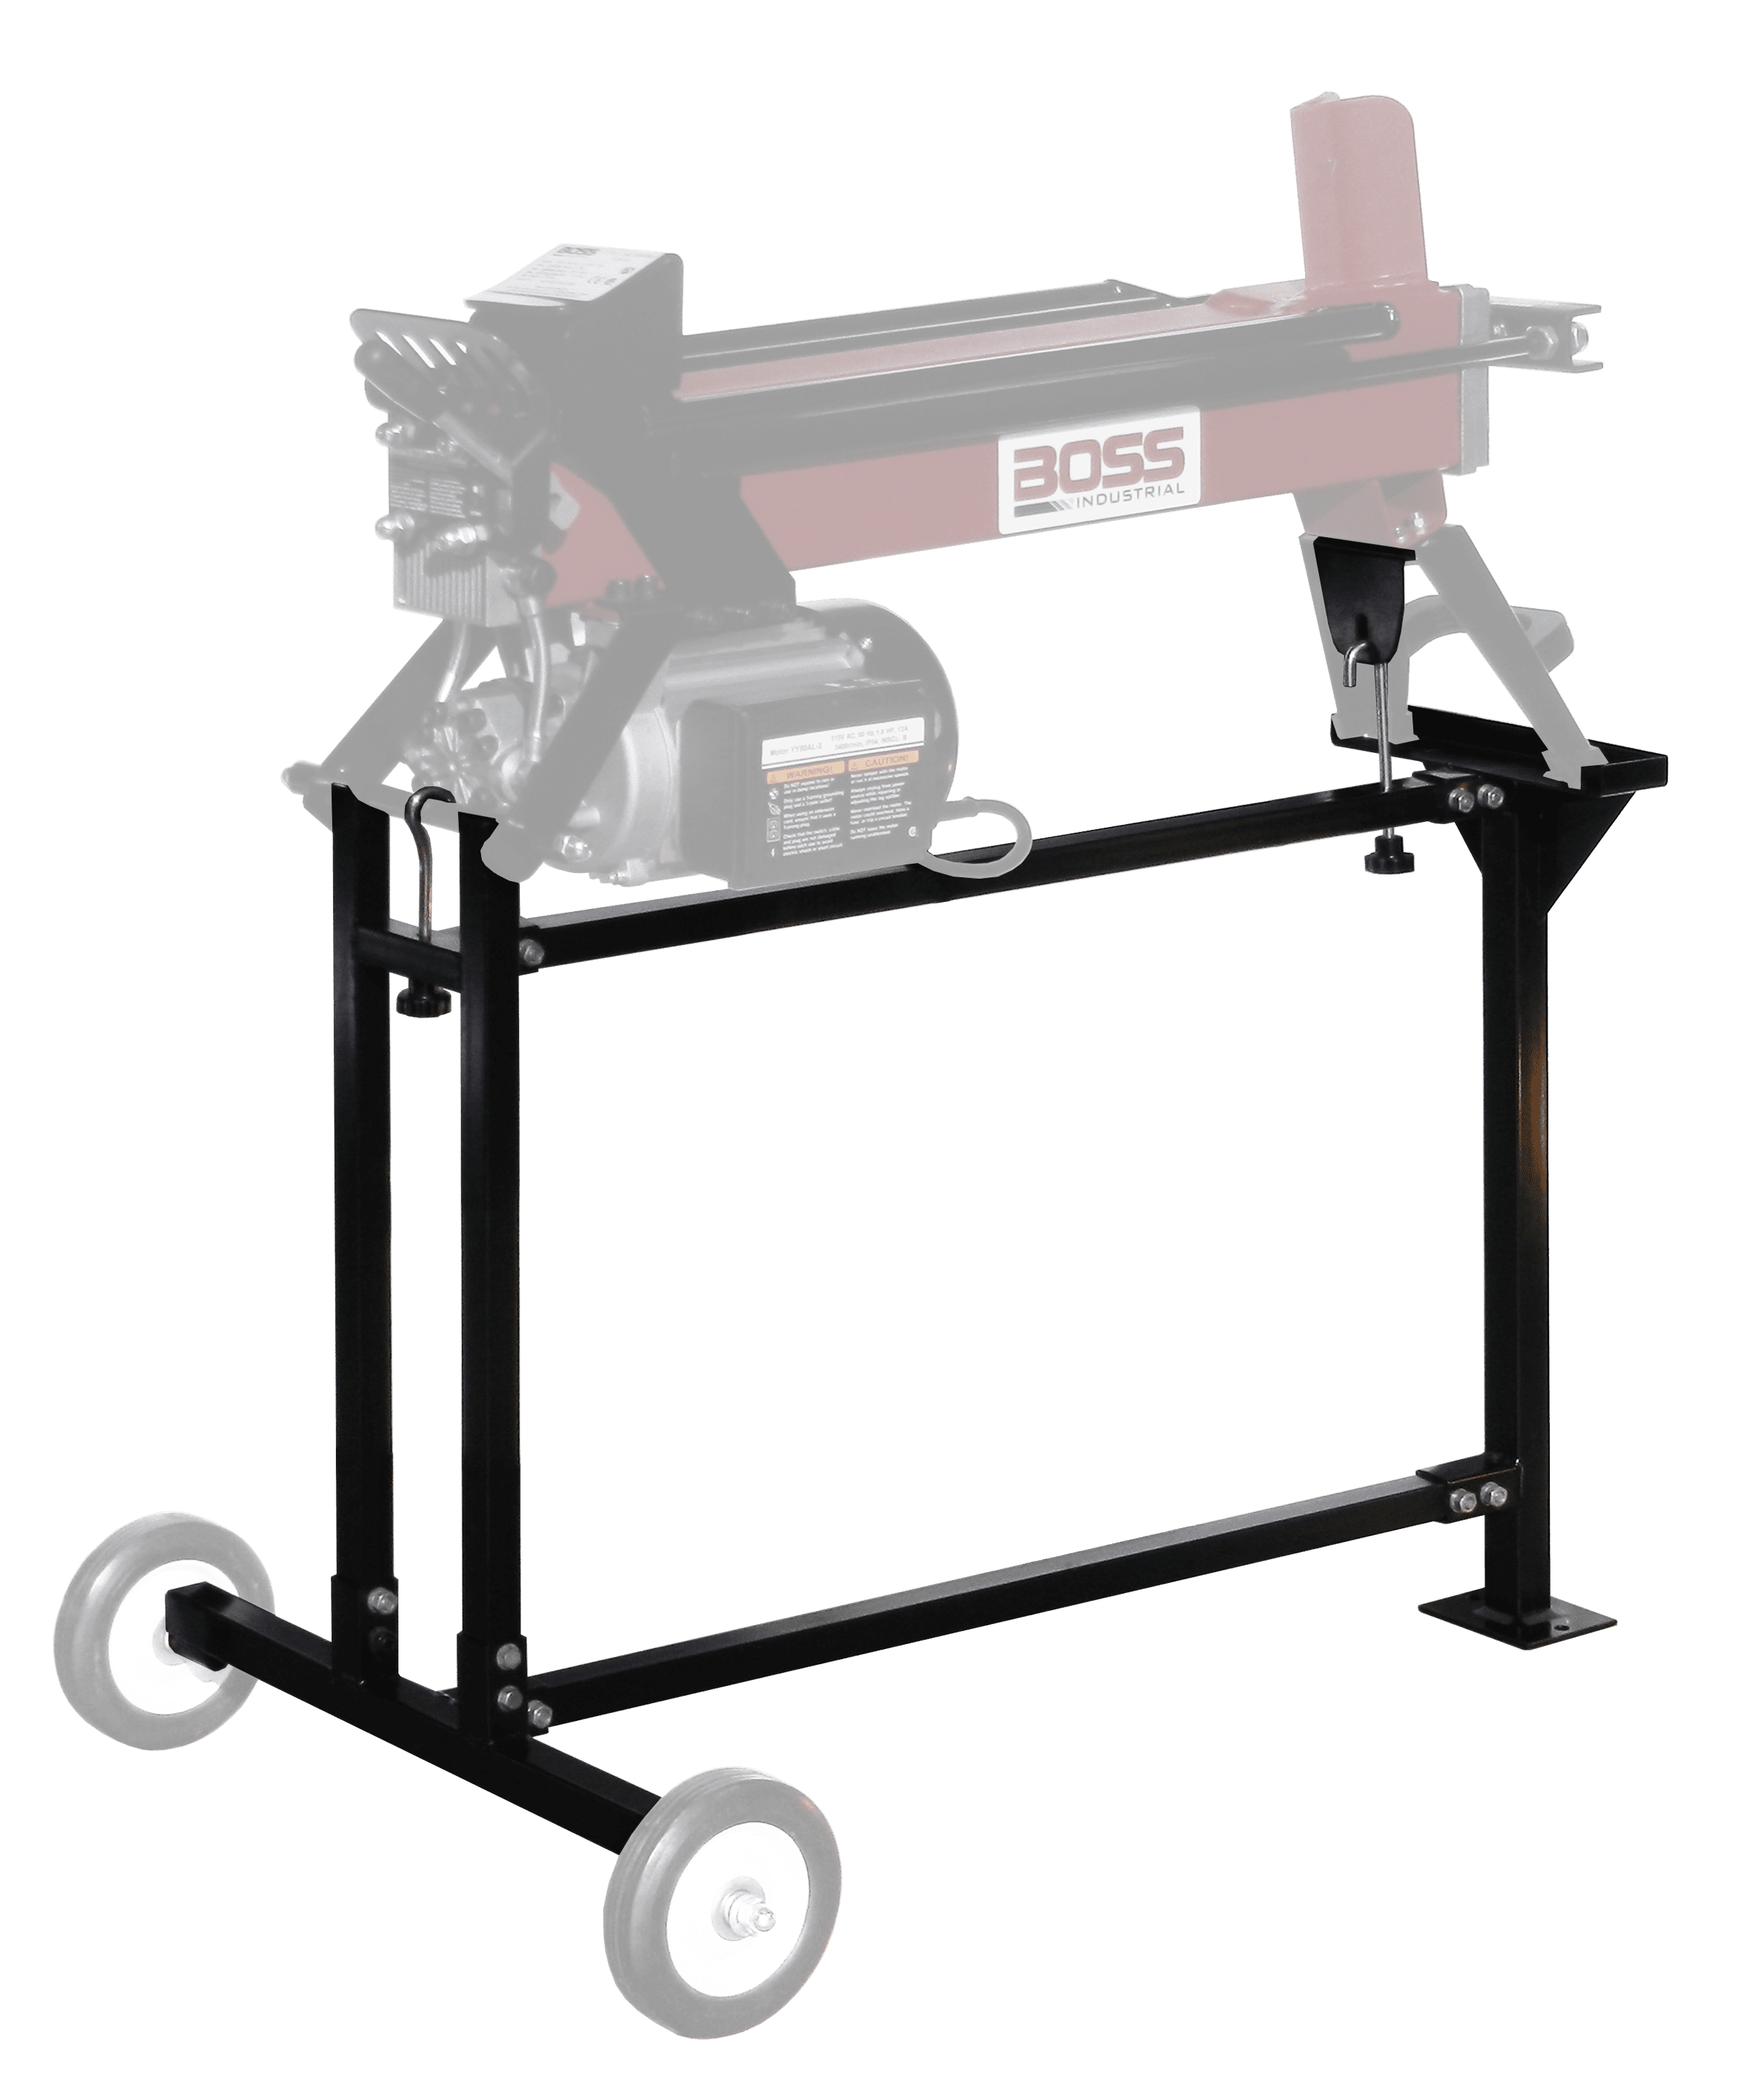 Boss Industrial Ft5 Log Splitter Stand 2day Delivery for sale online